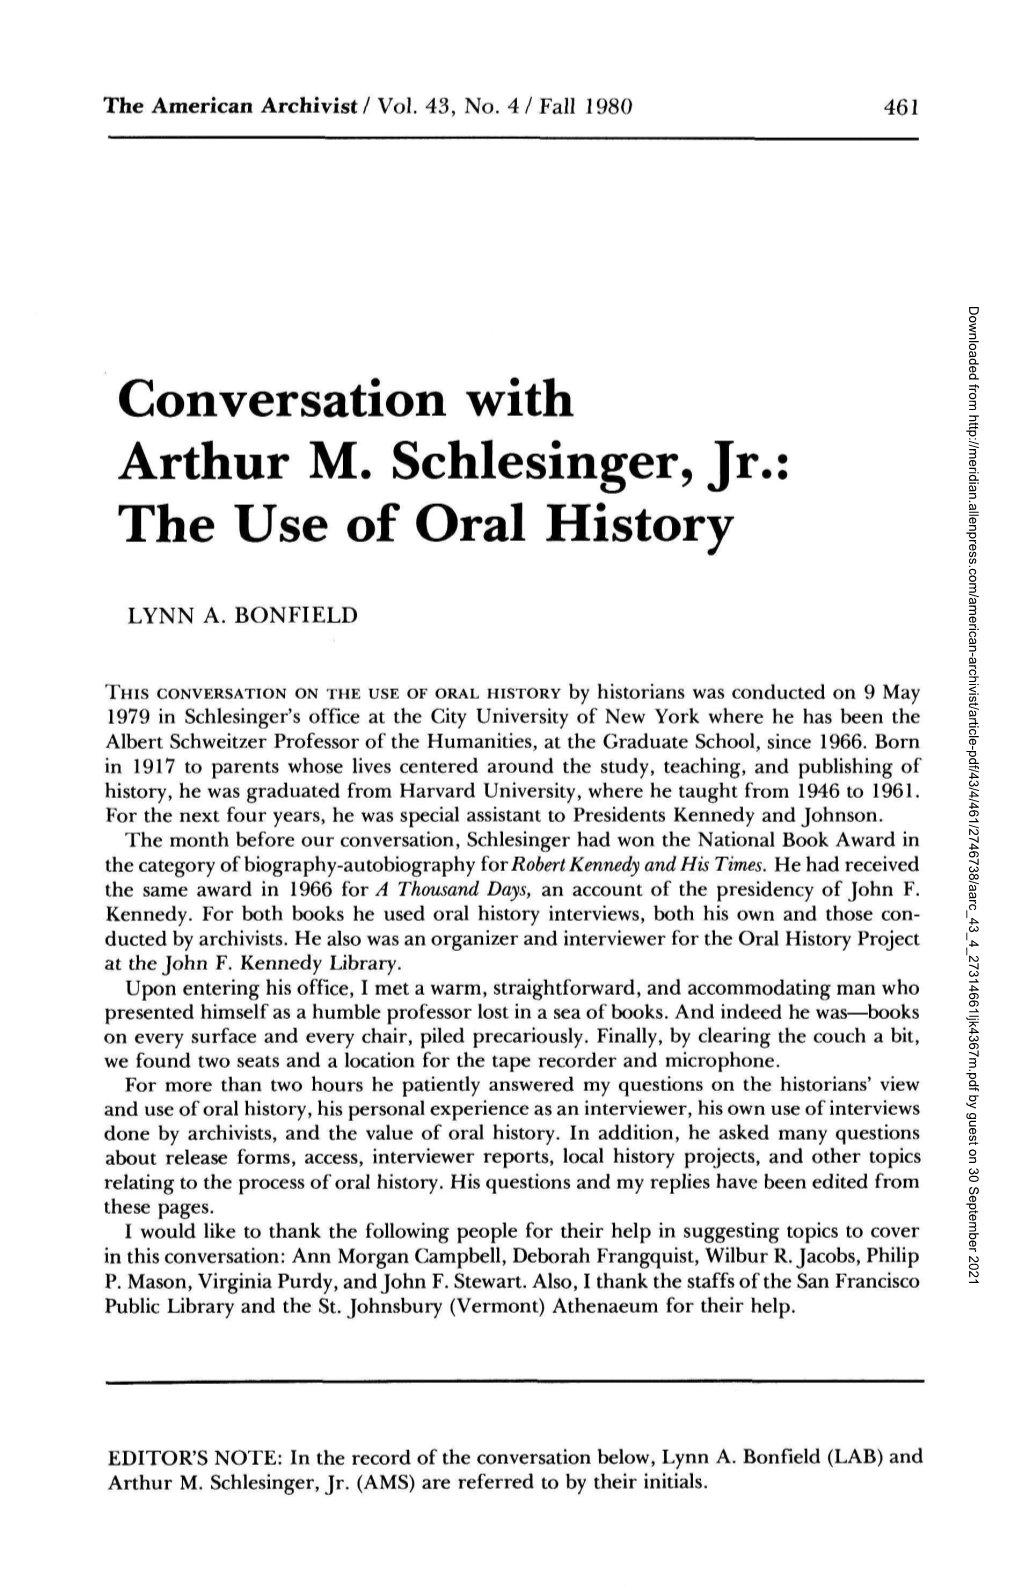 Conversation with Arthur M. Schlesinger, Jr.: the Use of Oral History